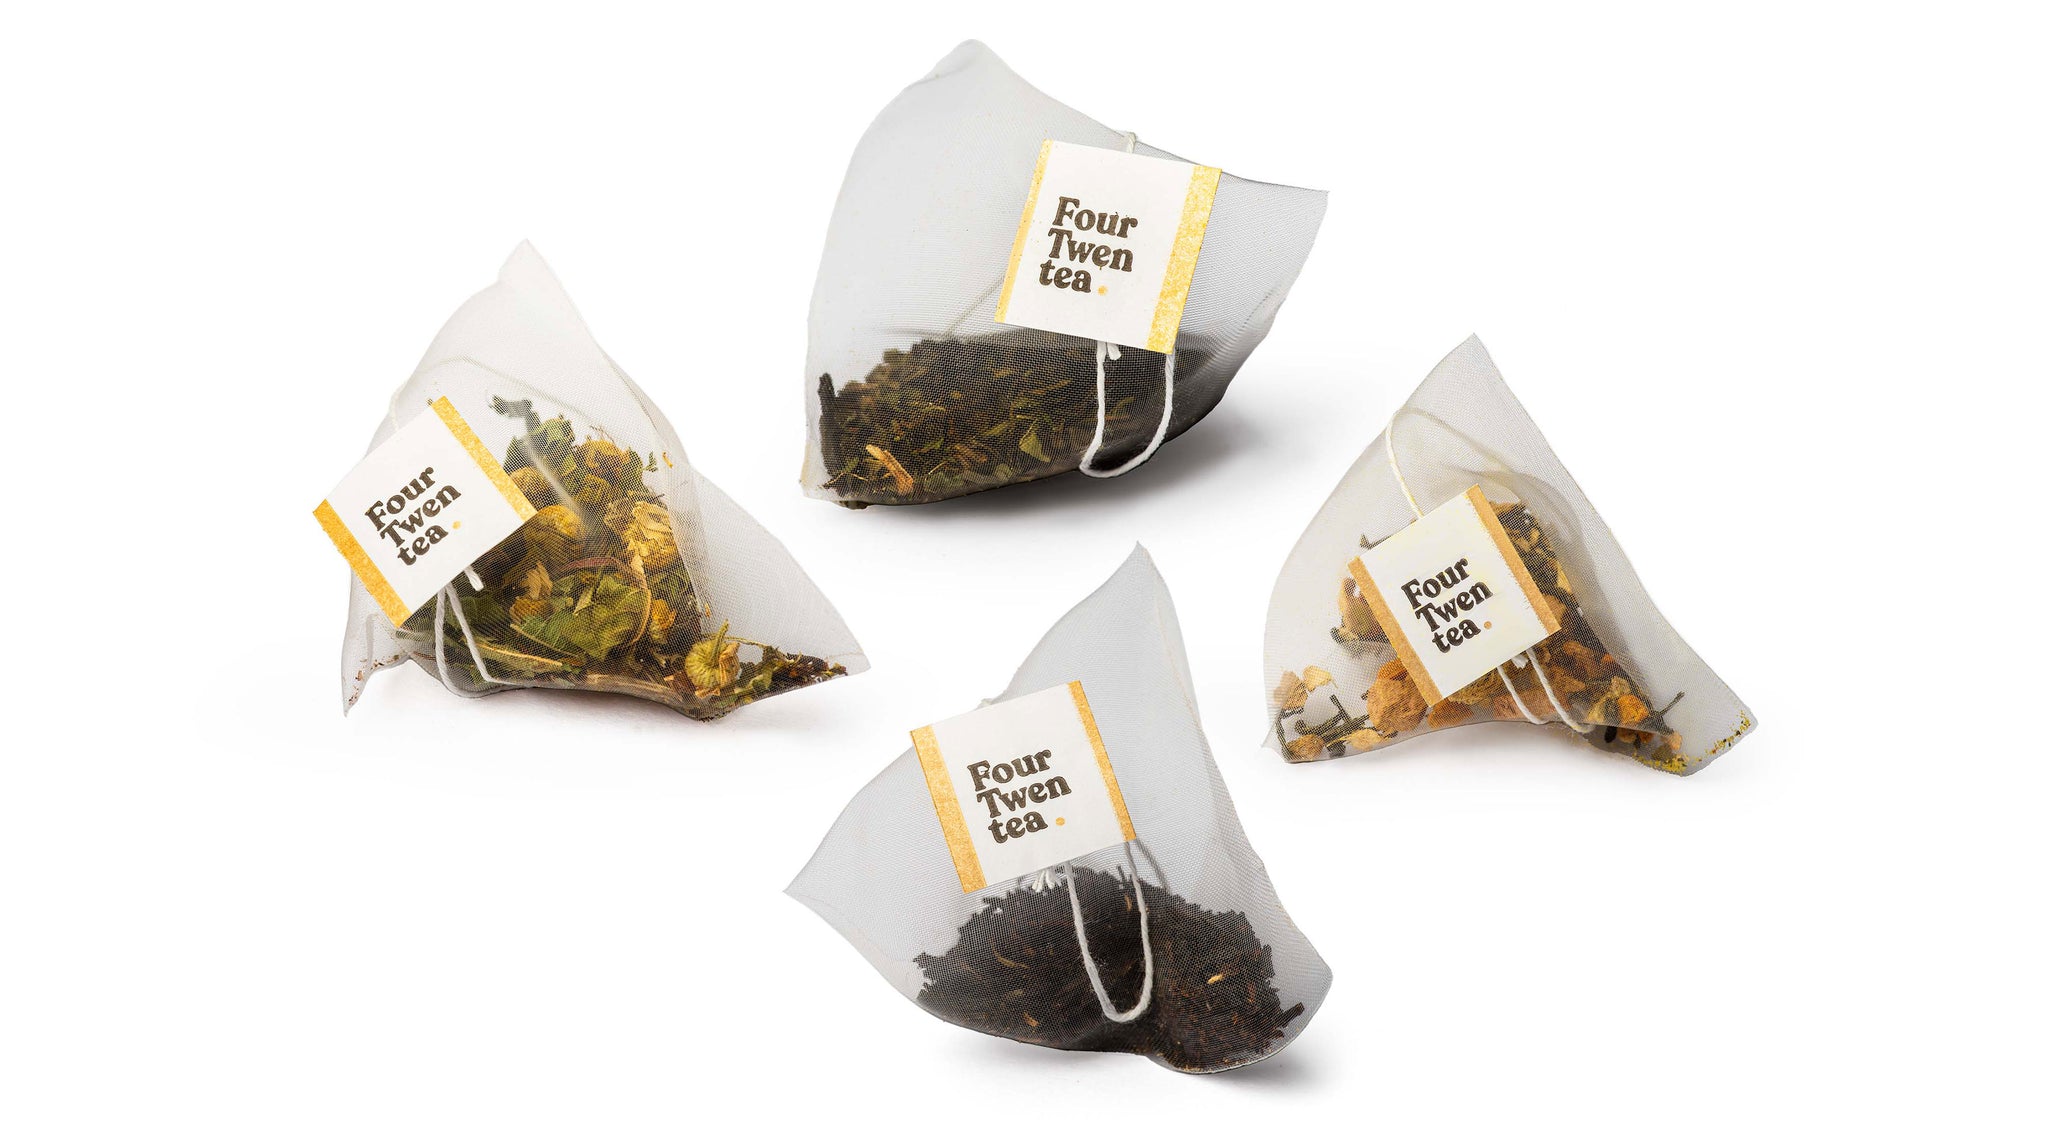 photos of all four blends of Four Twentea CBD tea just the teabags with ingredients and tea inside. To highlight they are plant based and compostable